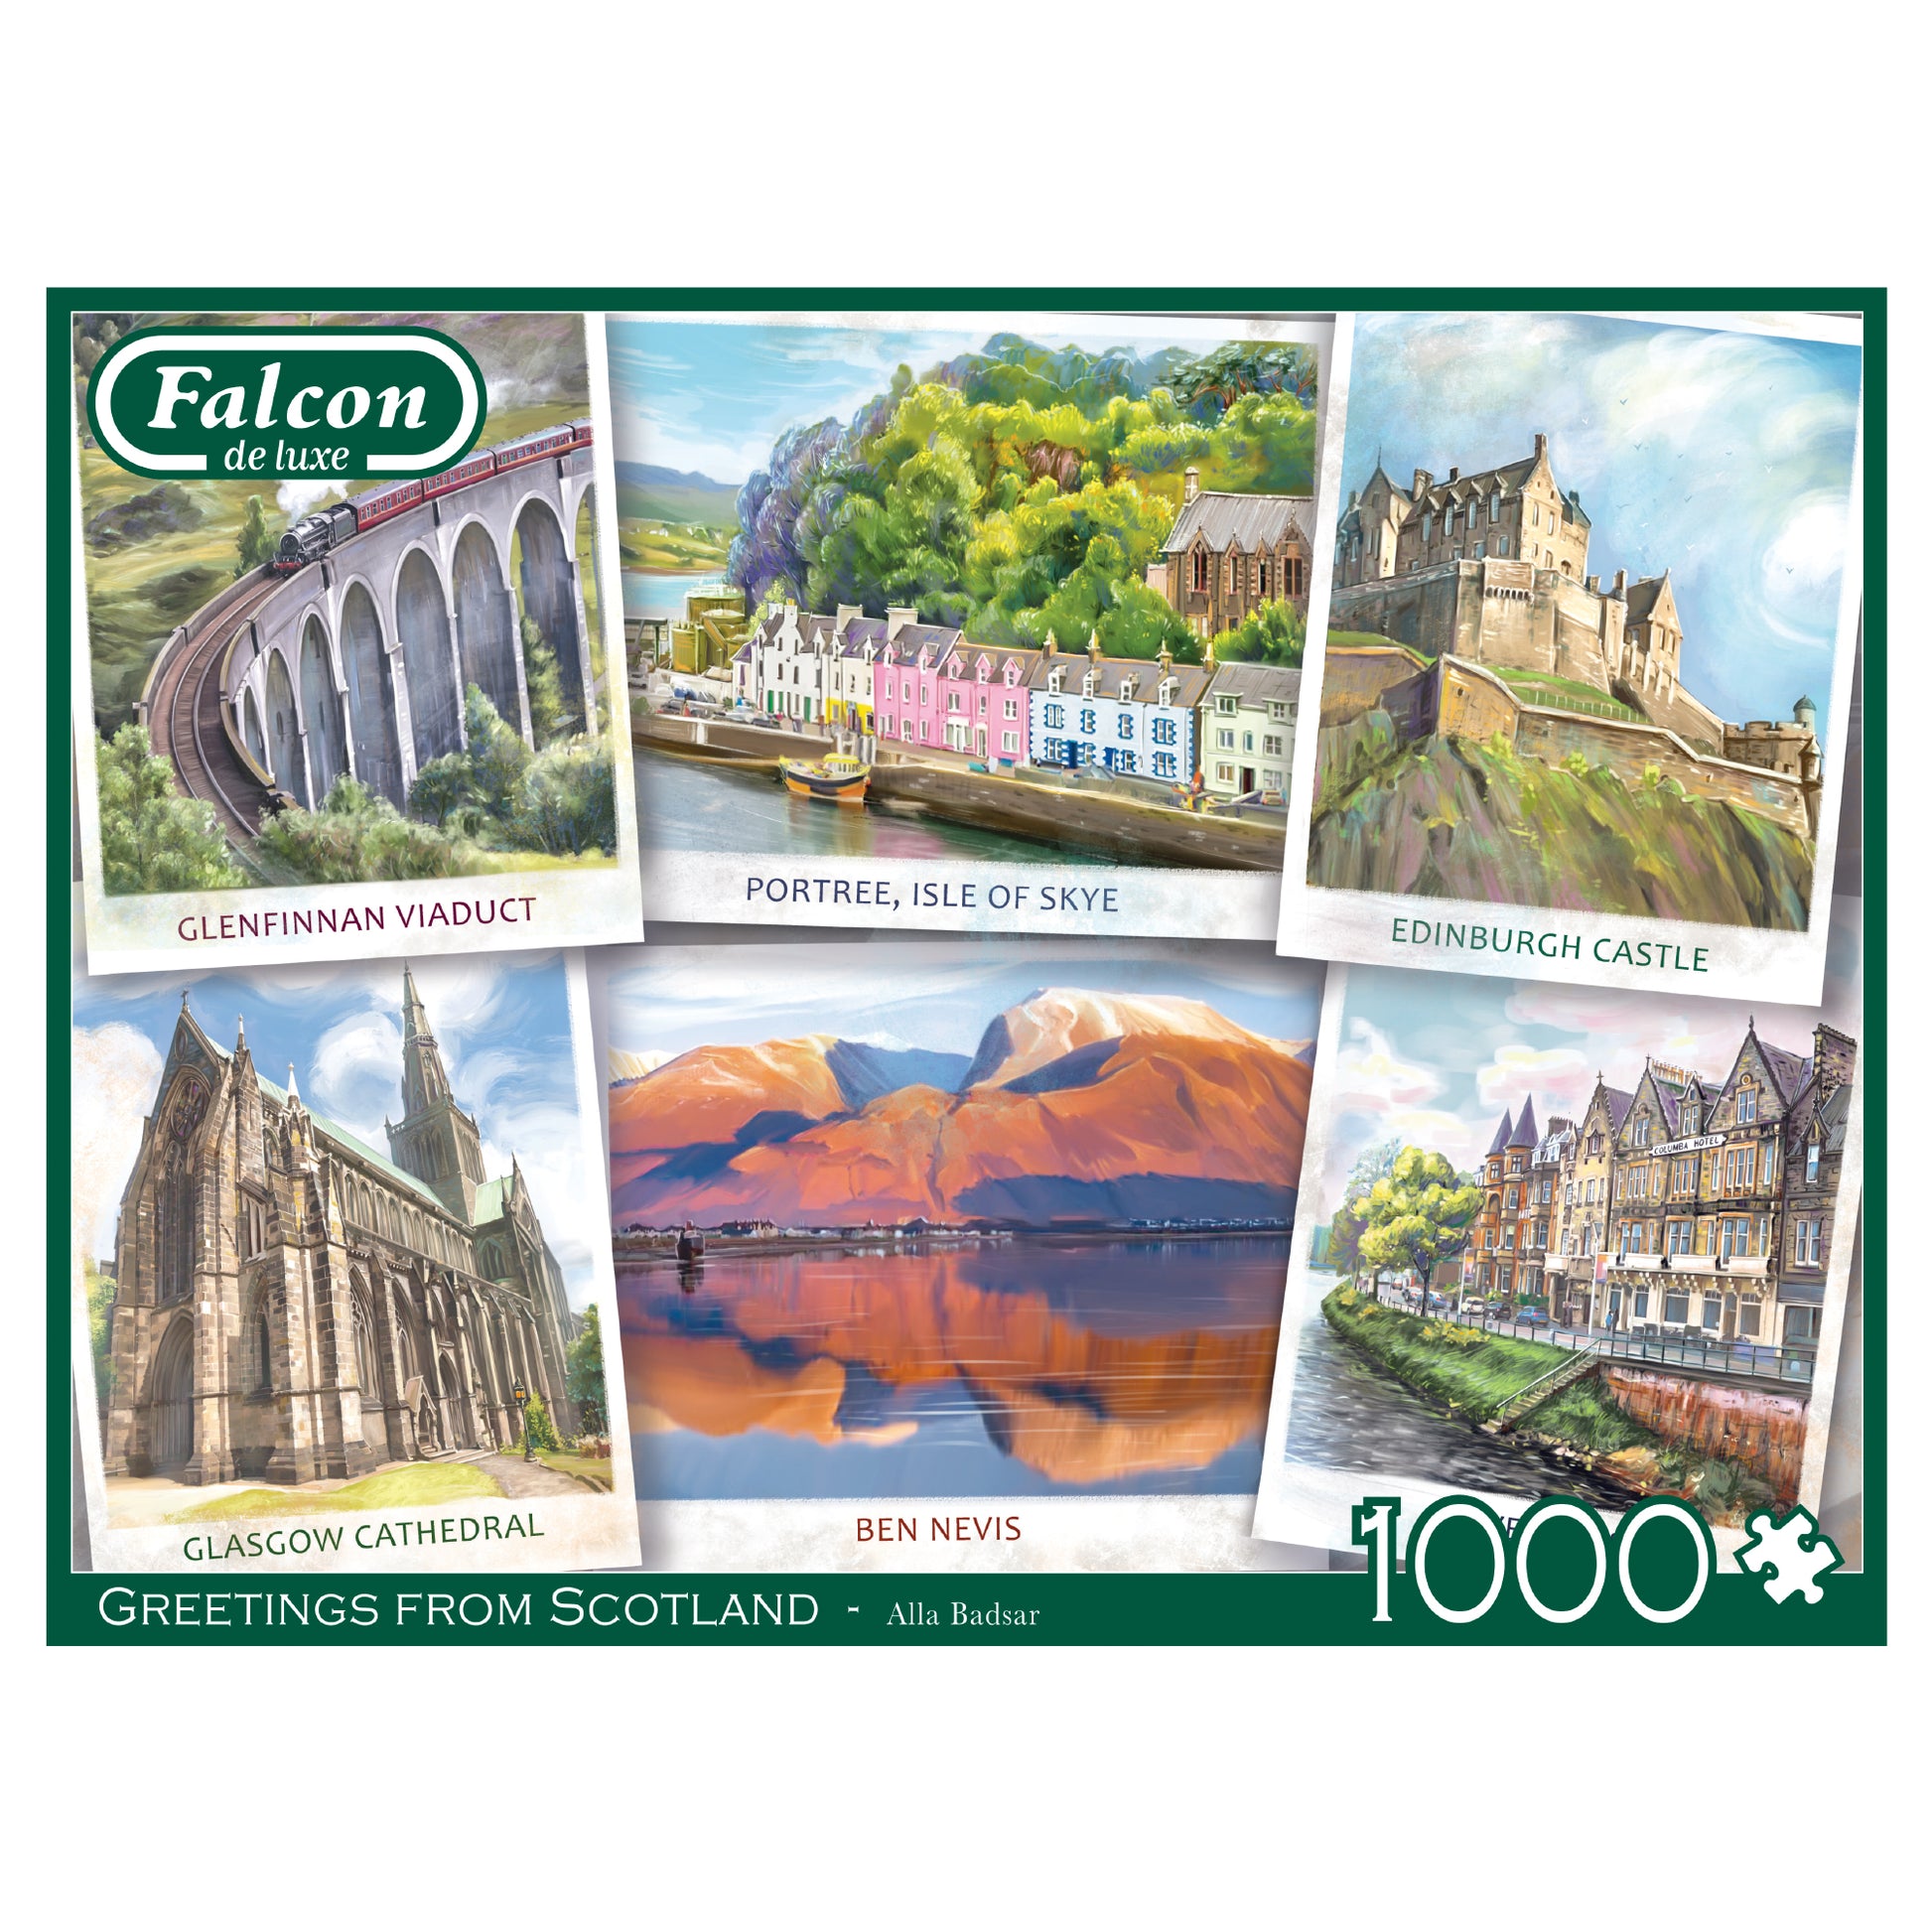 Falcon - Greetings from Scotland (1000 pieces) - product image - Jumboplay.com